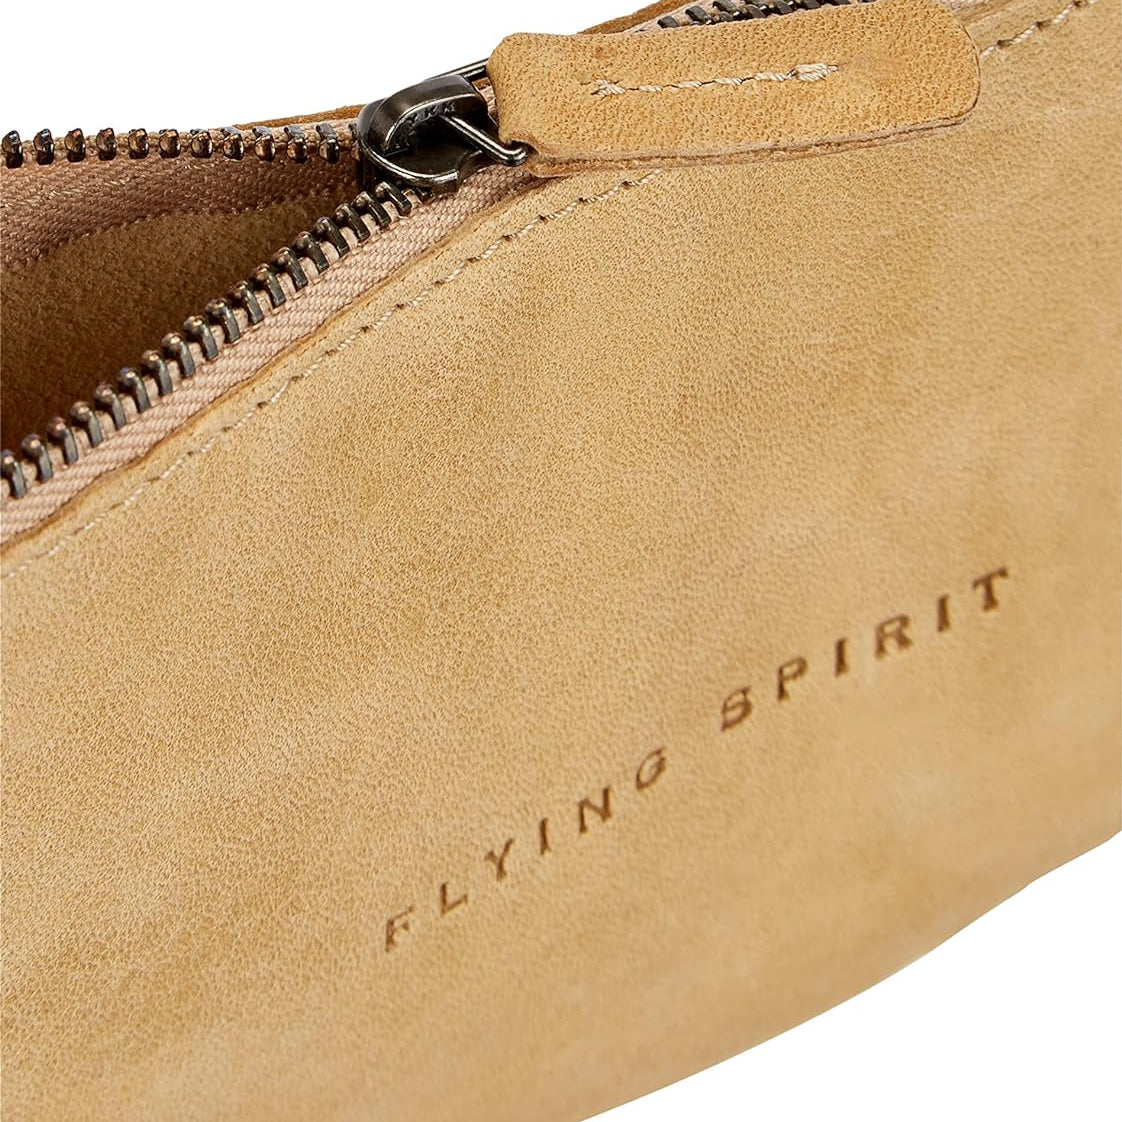 CLAIREFONTAINE Flying Spirit Leather Flat Pencil Case Beige